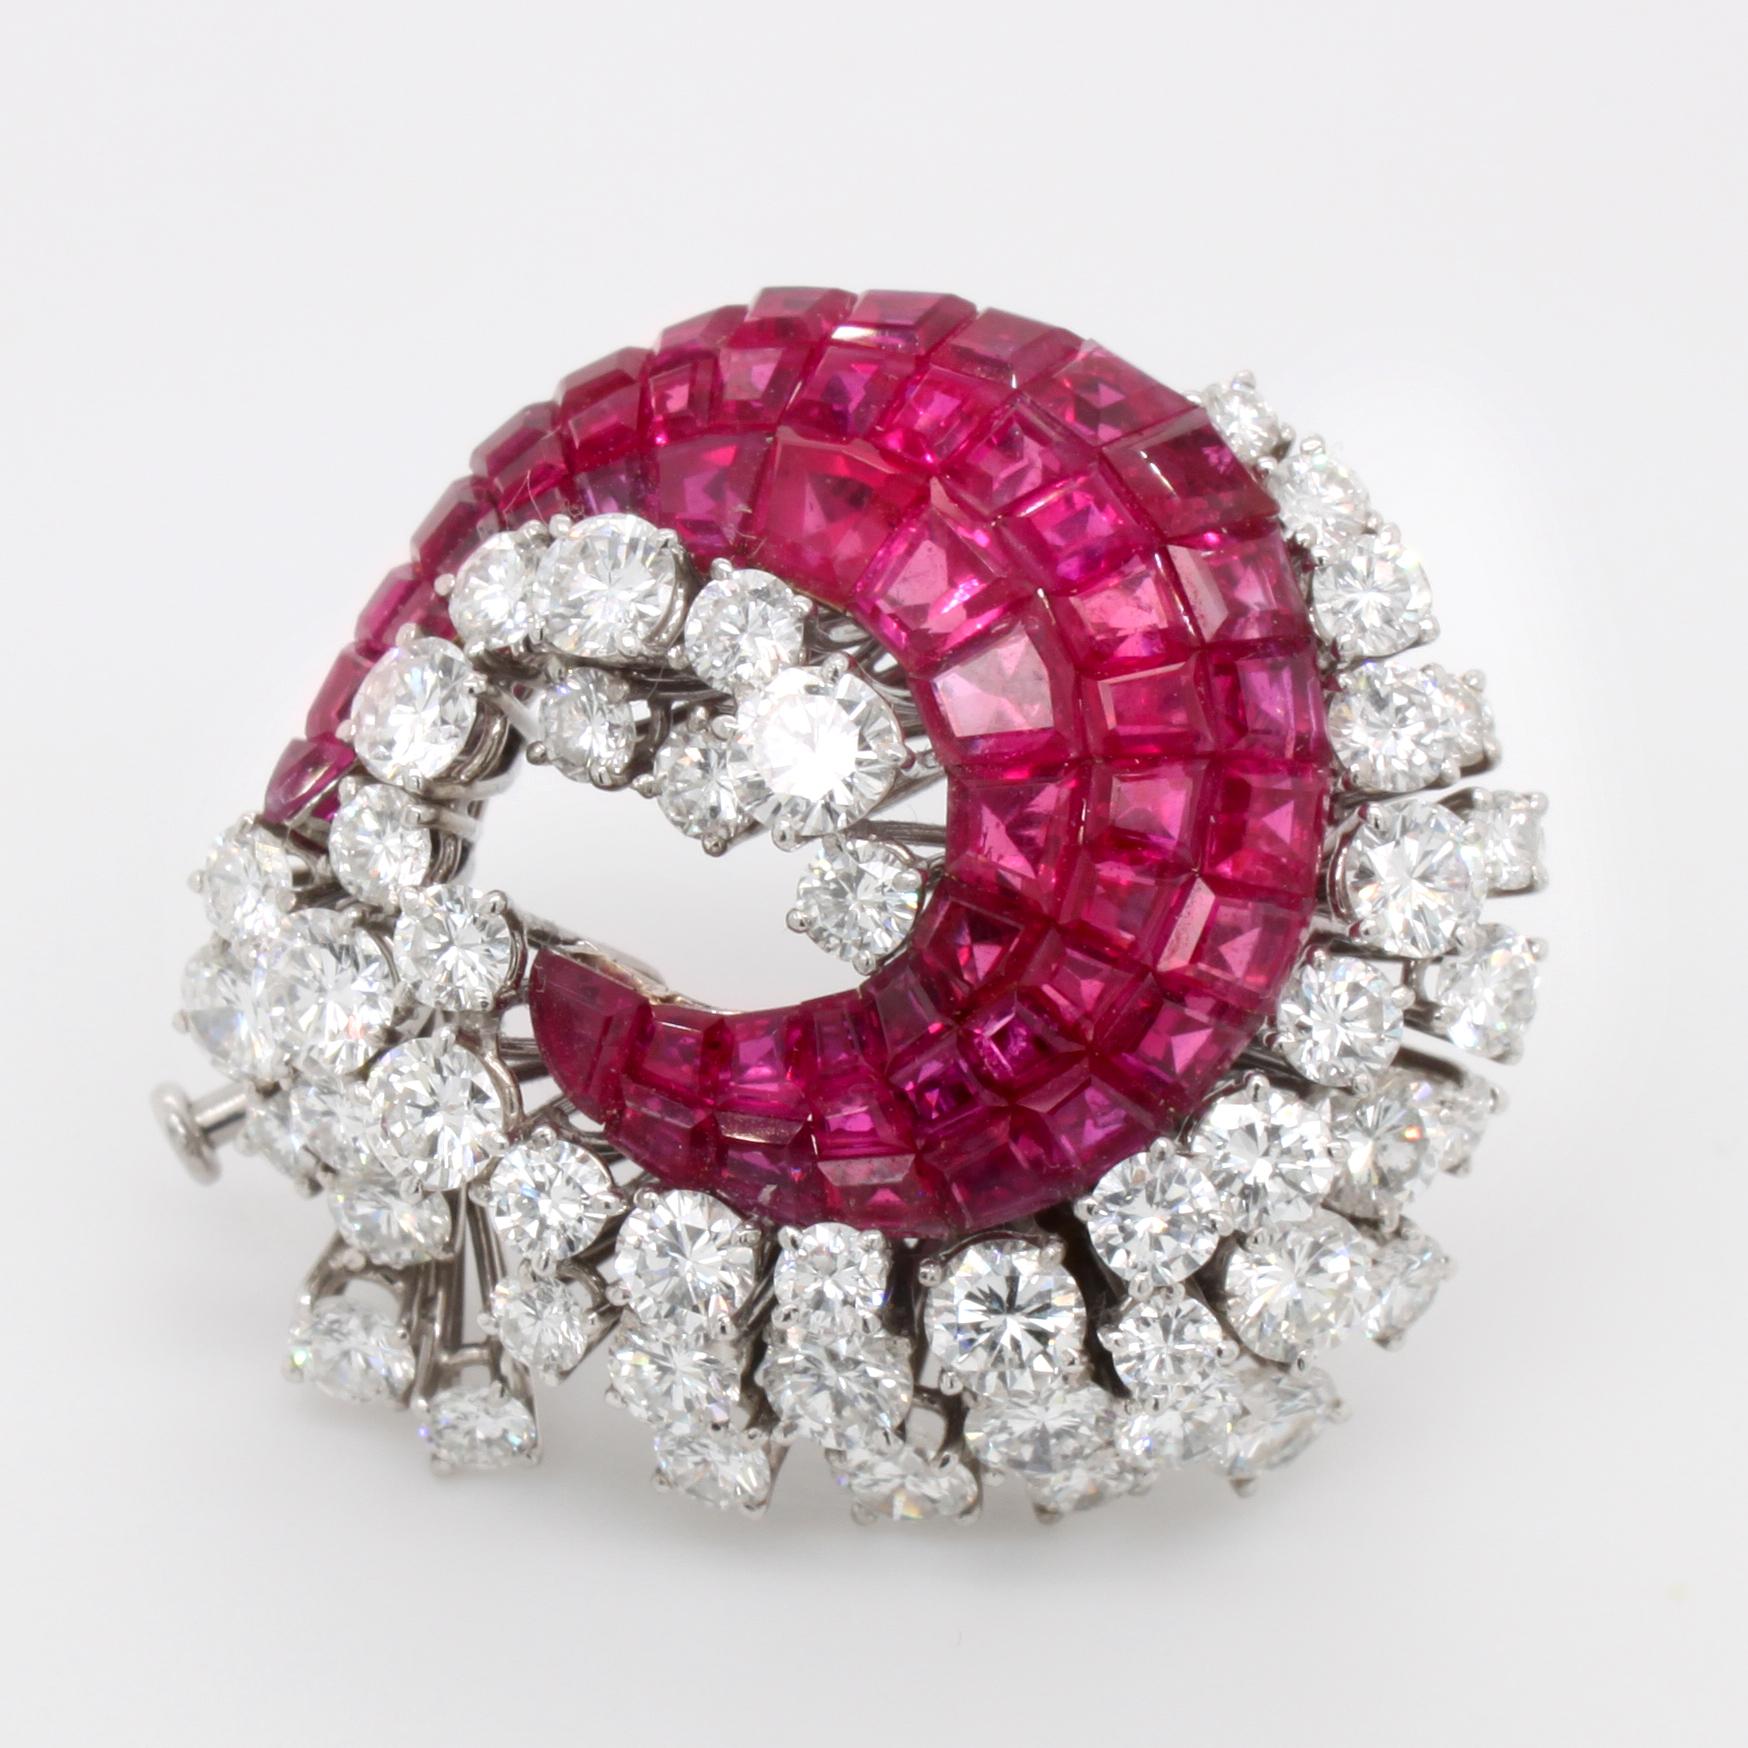 A ruby and diamond brooch in platinum, by the German jeweller Schilling. The rubies are mystery set with a very fine craftsmanship. They are surrounded by round brilliant cut diamonds of F/G colour and VVS/VS clarity, weighing approximately 5 carats